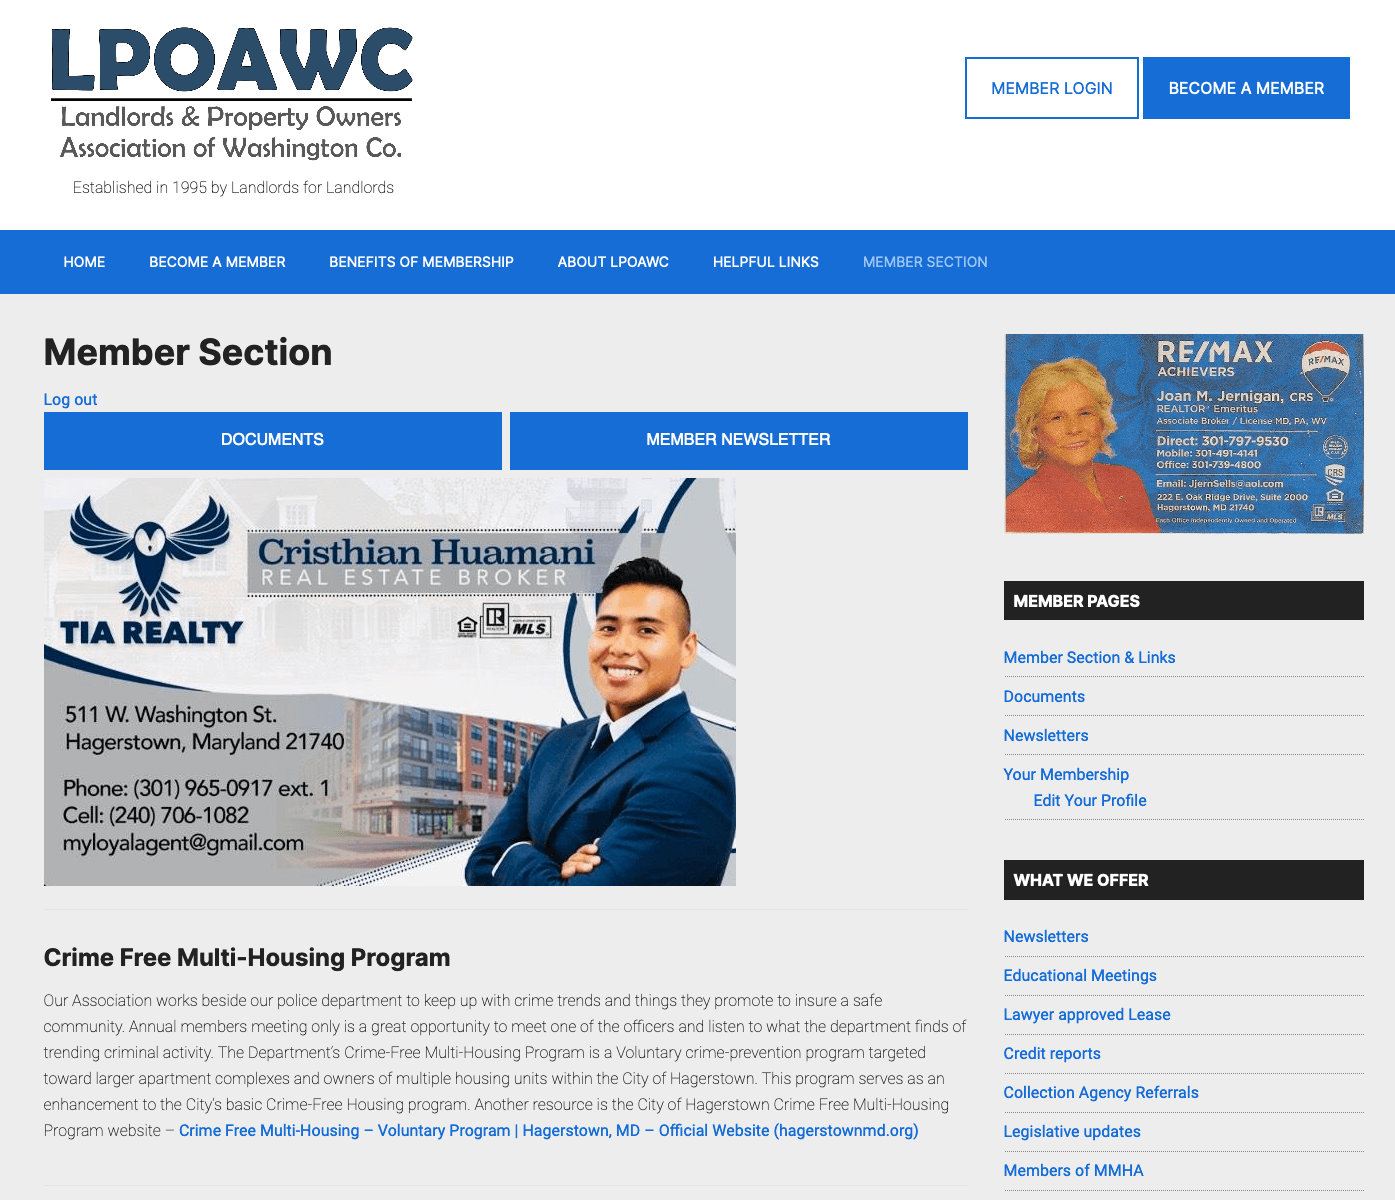 New LPOAWC Website First-Time Login Instructions